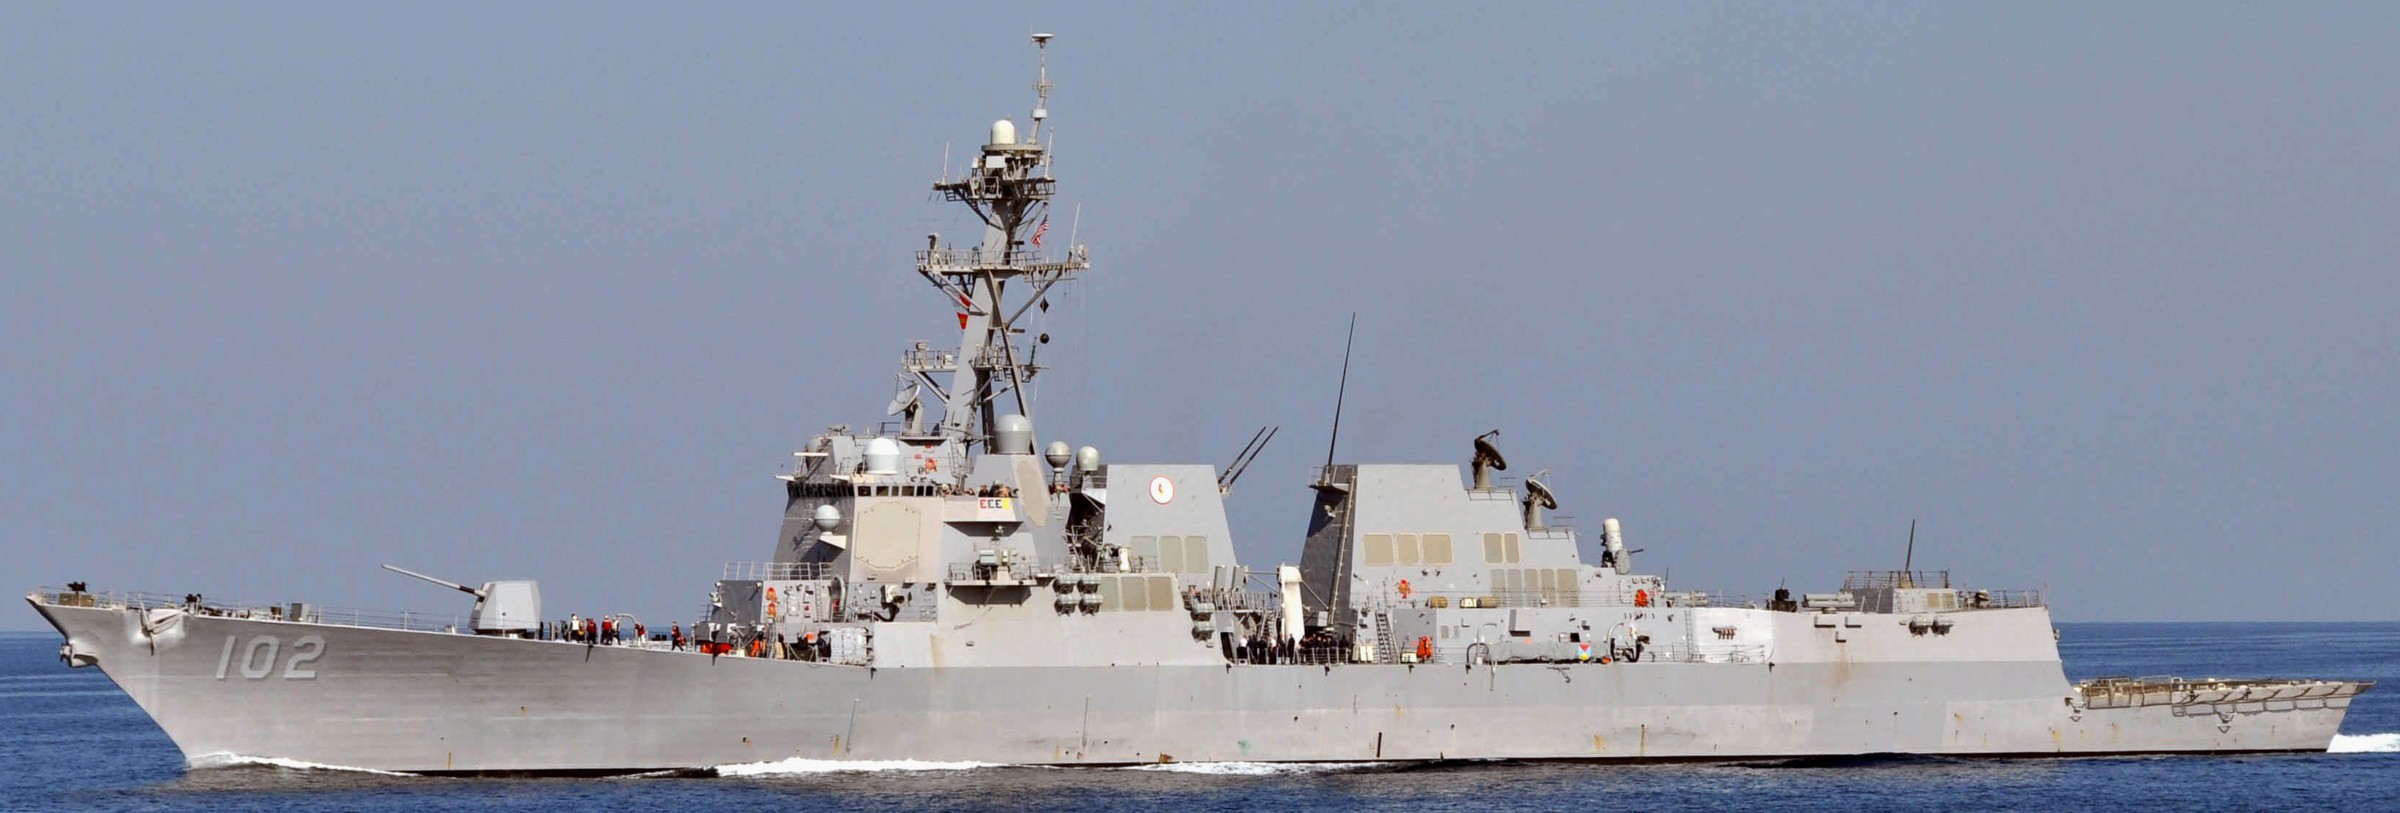 ddg-102 uss sampson arleigh burke class guided missile destroyer aegis us navy gulf of oman 44